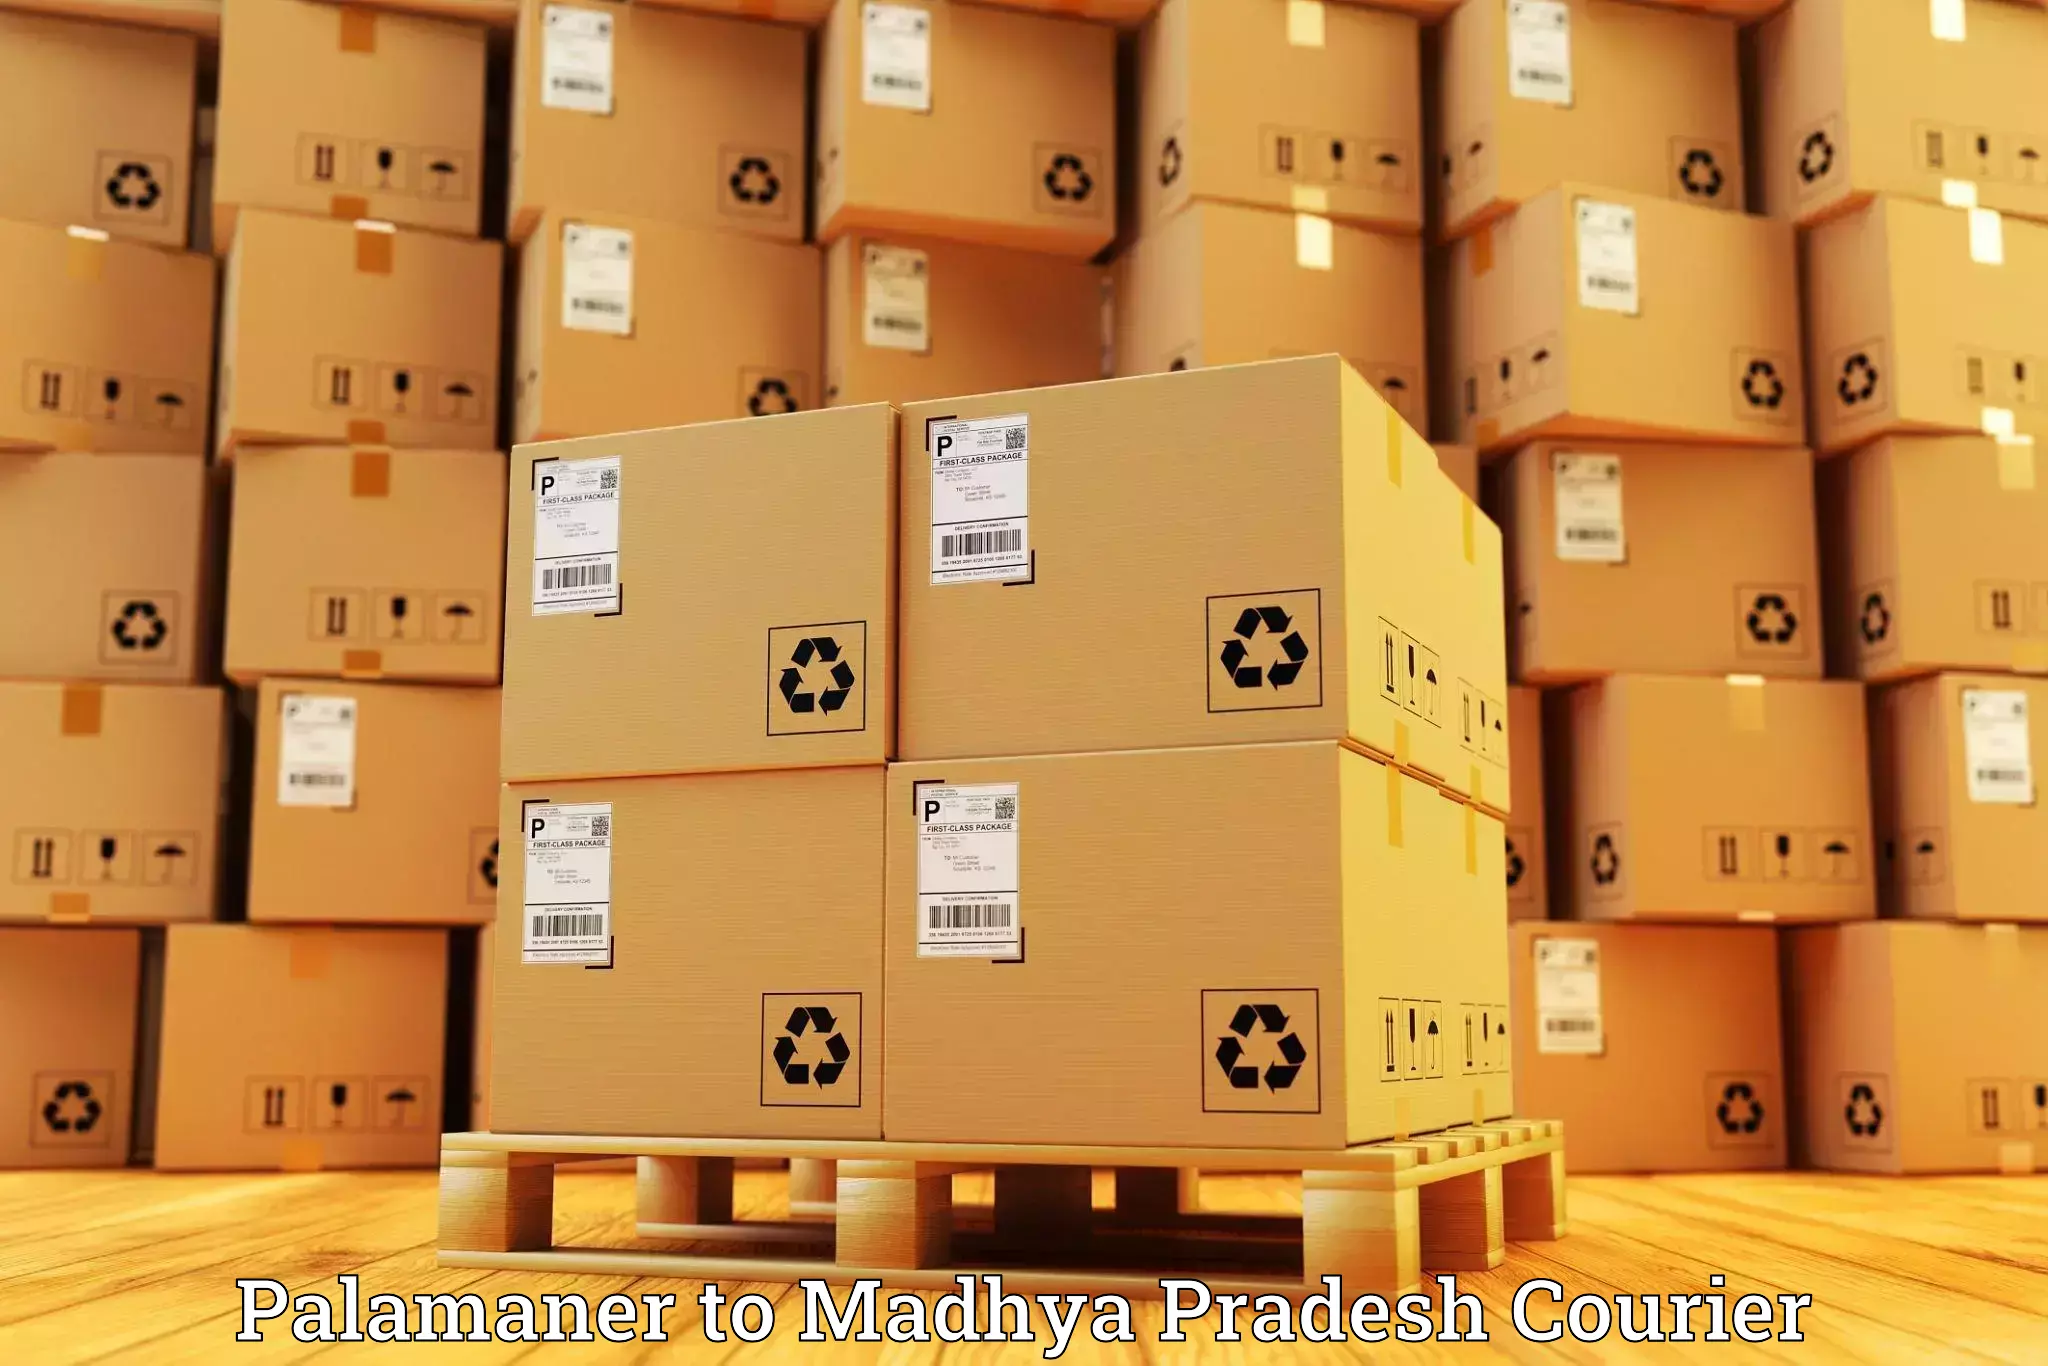 State-of-the-art courier technology Palamaner to Chand Chaurai